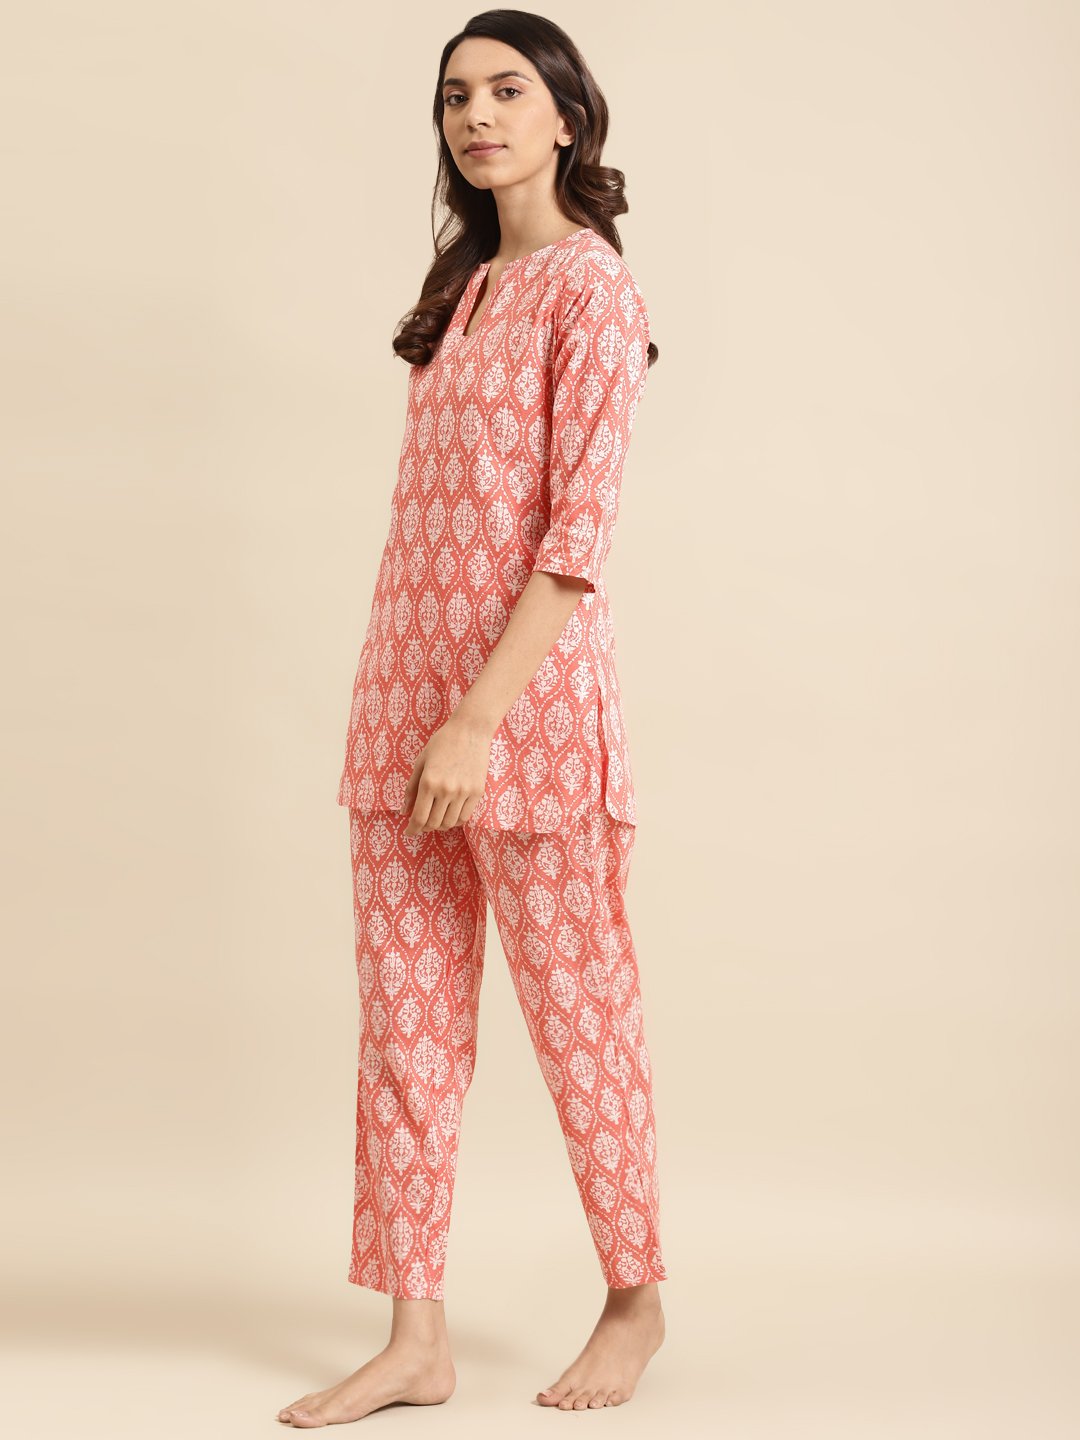 Women's Peach & Off White Printed Night Suit - Nayo Clothing